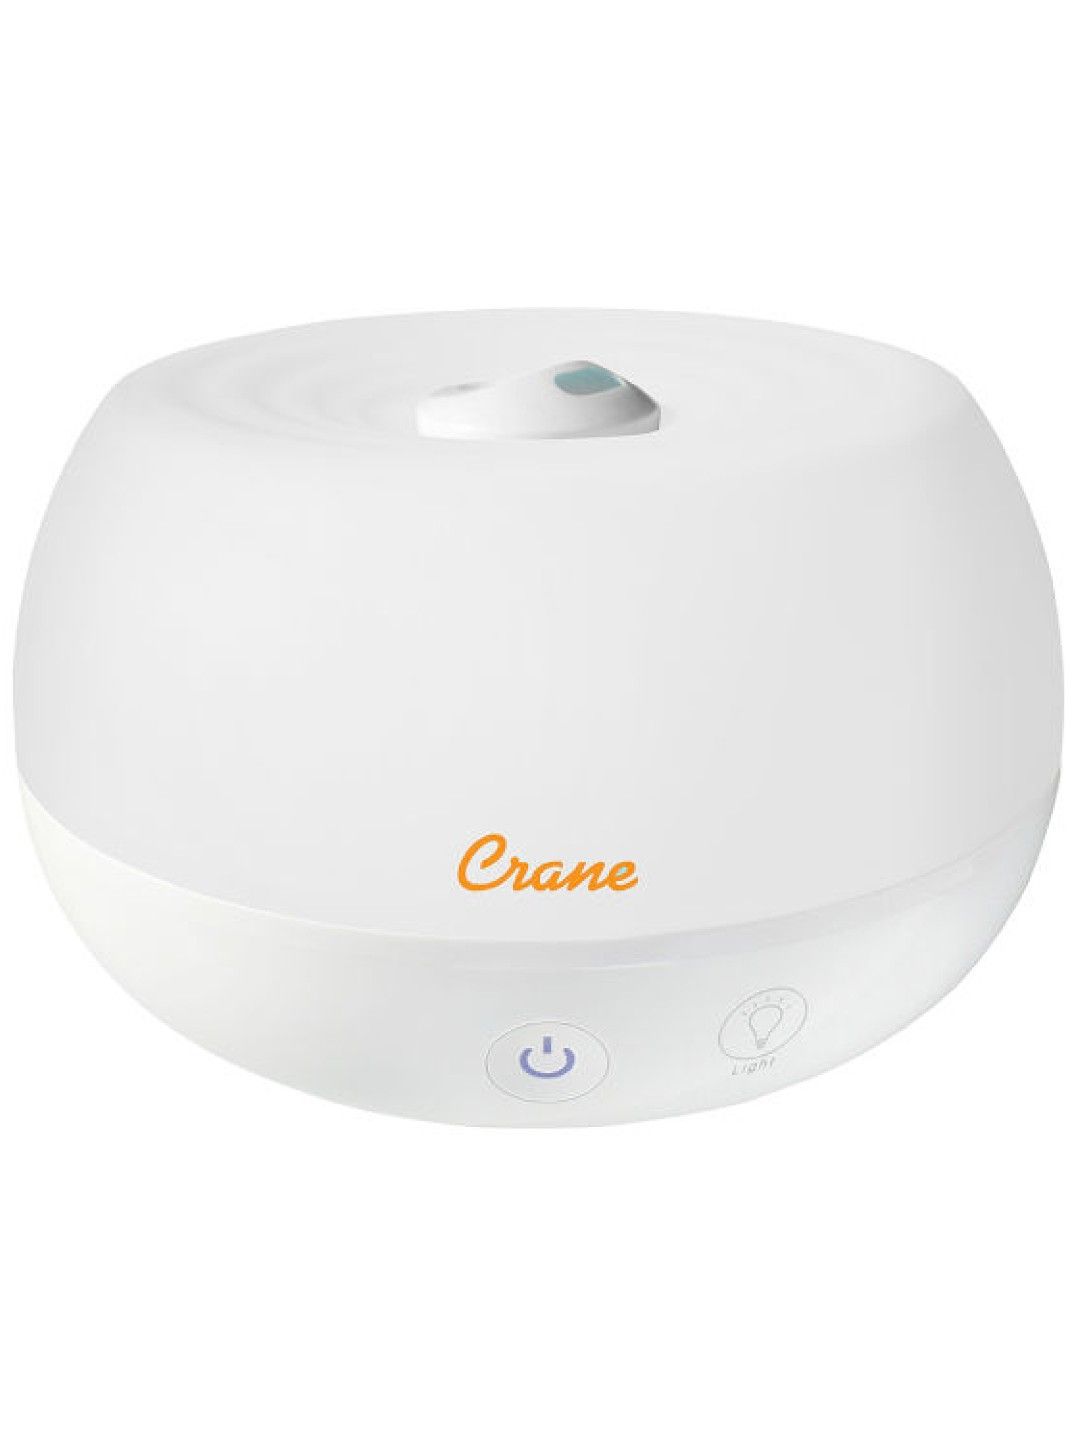 Crane 2-in-1 Personal Cool Mist Humidifier with Aroma Diffuser